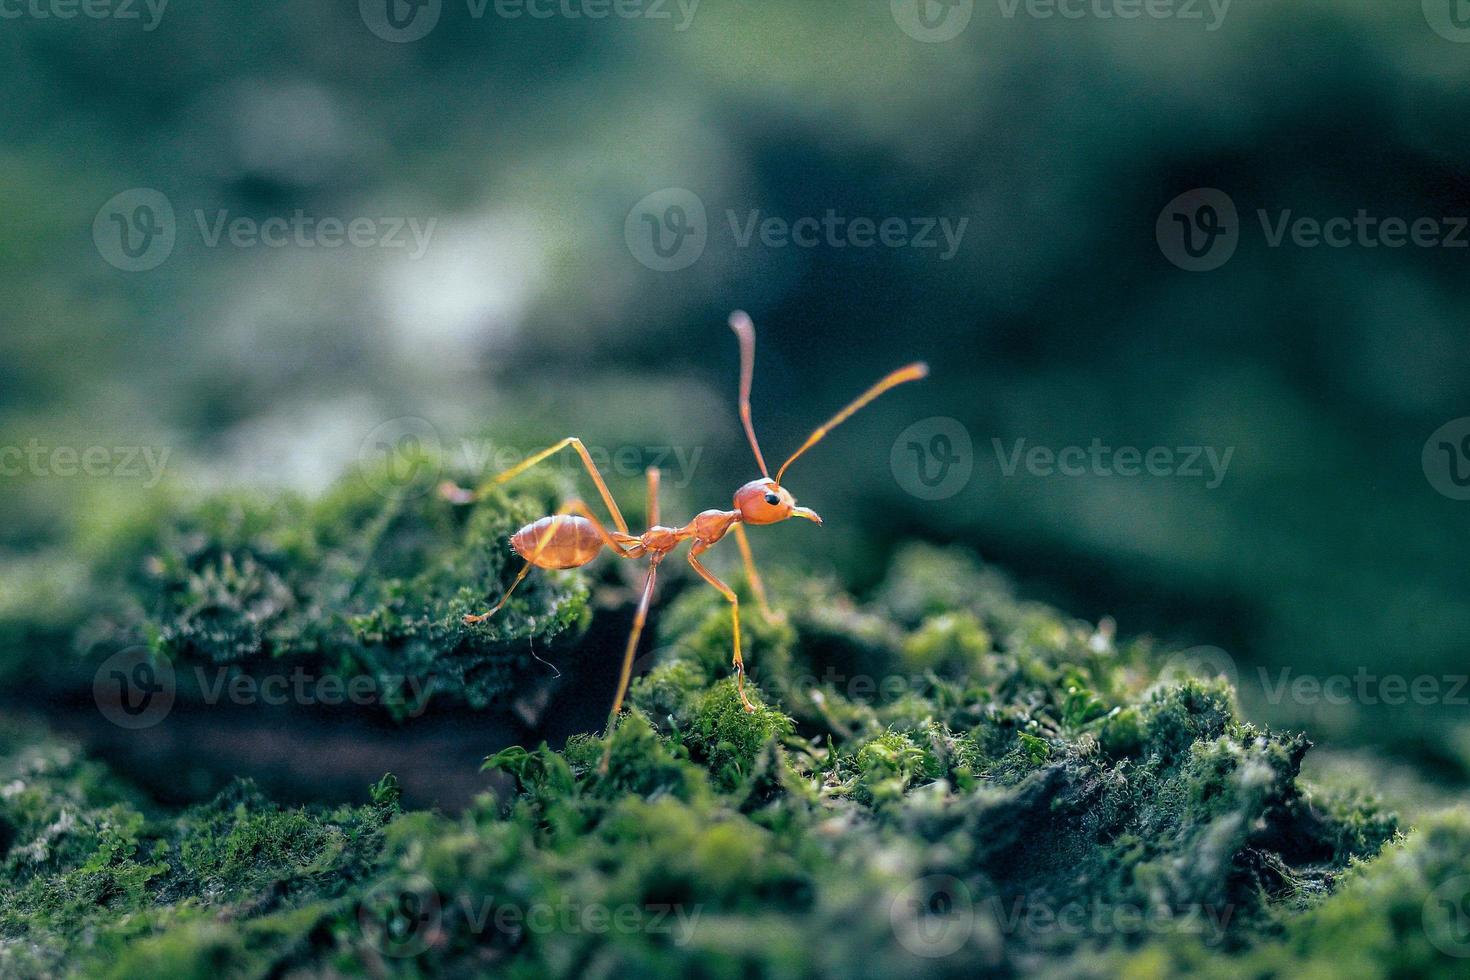 Close-up view of a red weaver ant photo